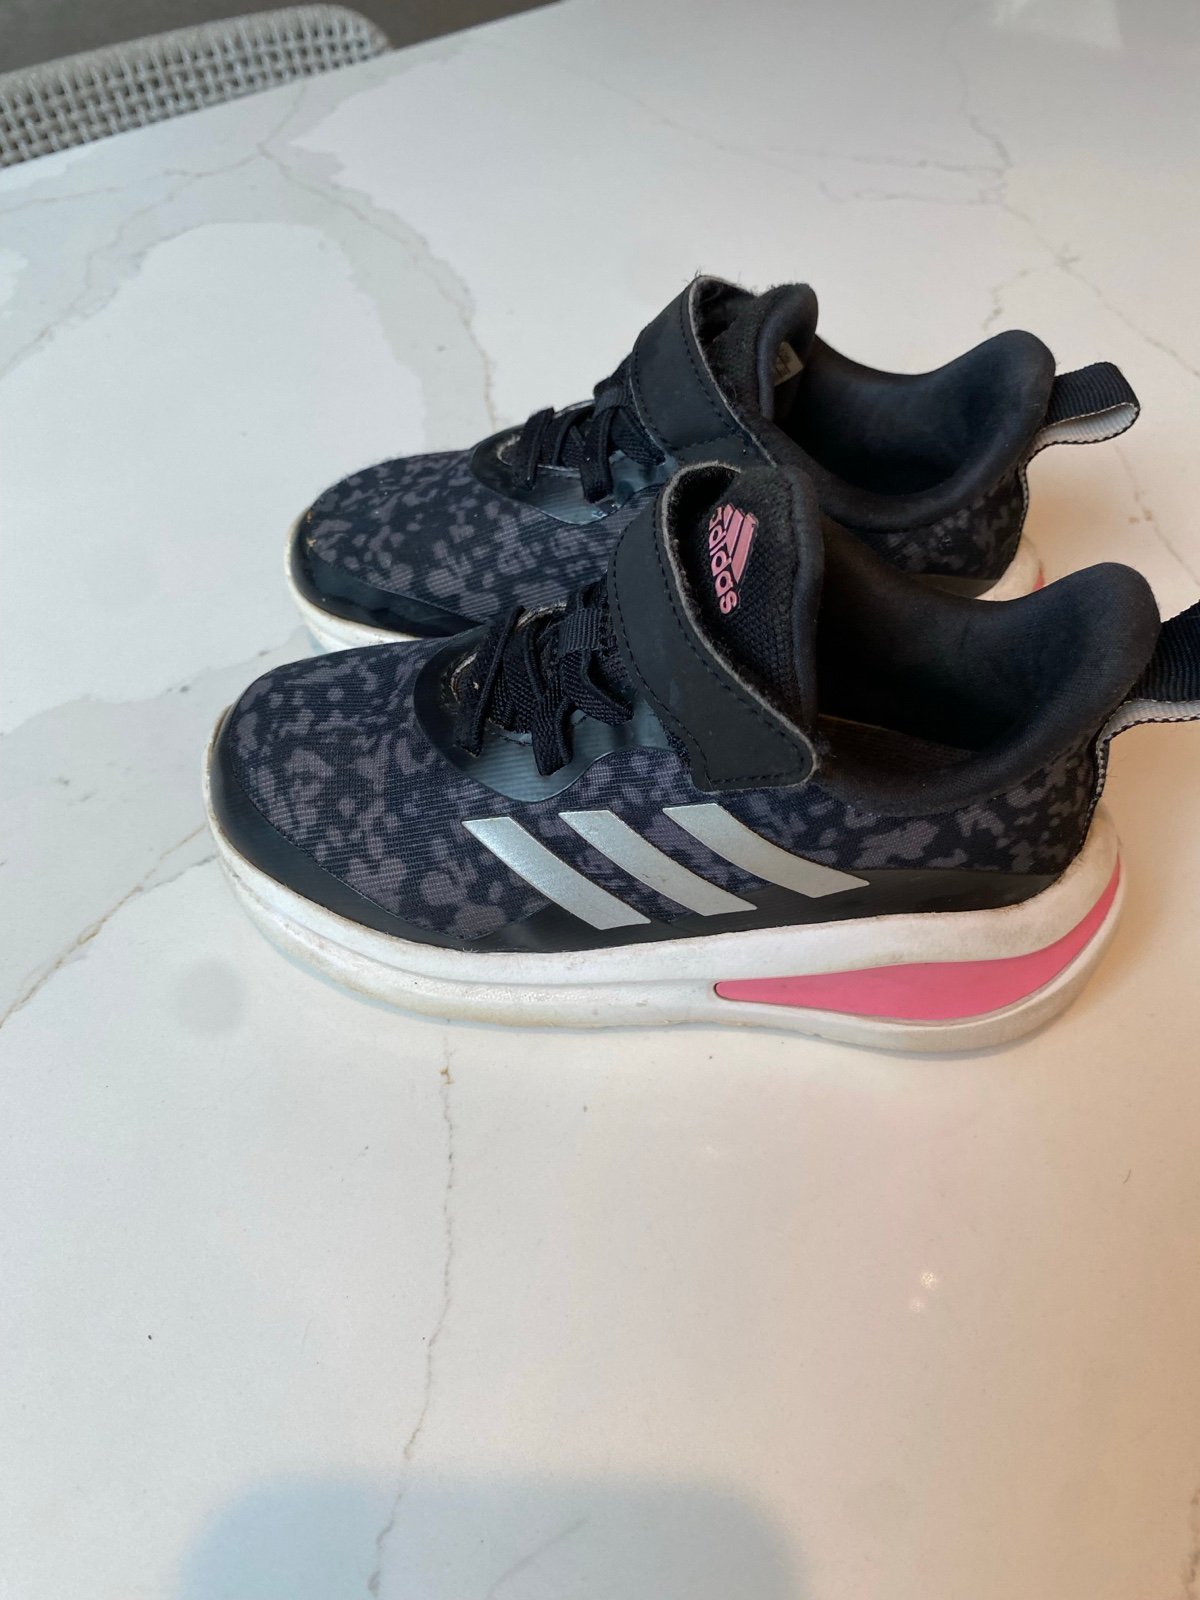 Adidas Toddler Girl Shoes, size 8 rdolV9Oh3